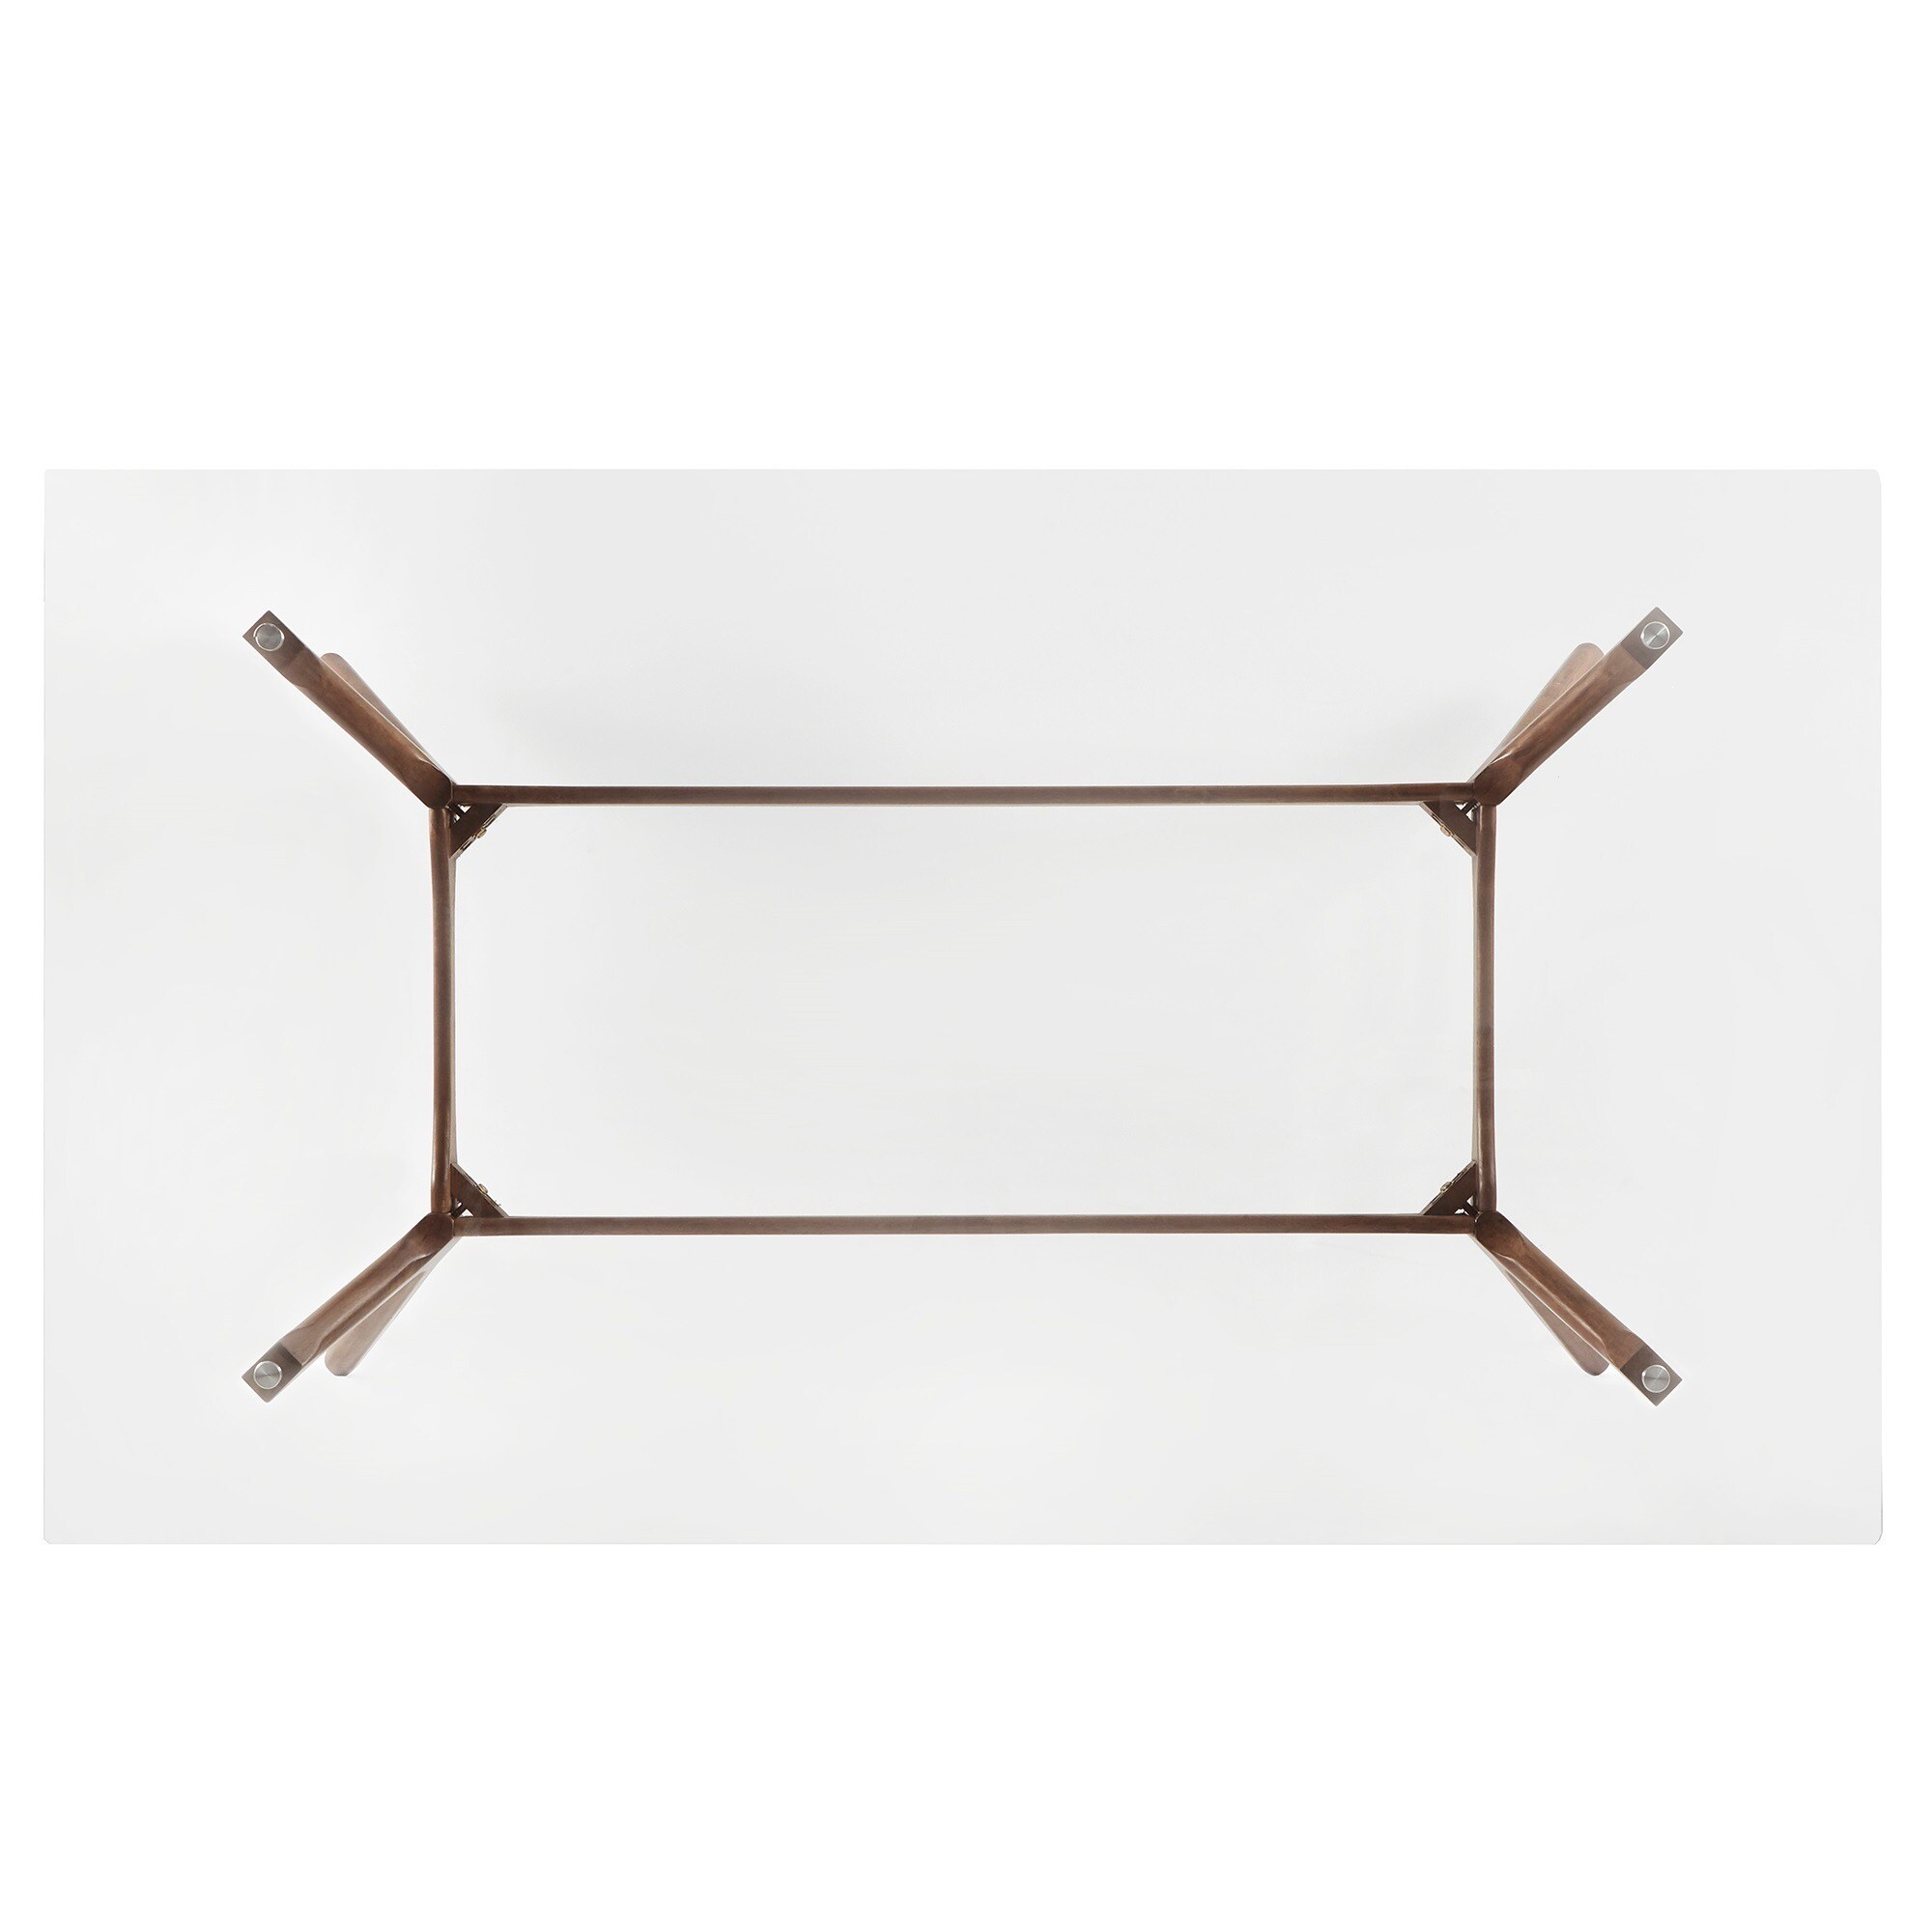 Nadine Dark Walnut Finish Glass Table Top Round Dining Set - Curved Back  Chairs by iNSPIRE Q Modern - On Sale - Bed Bath & Beyond - 18218122